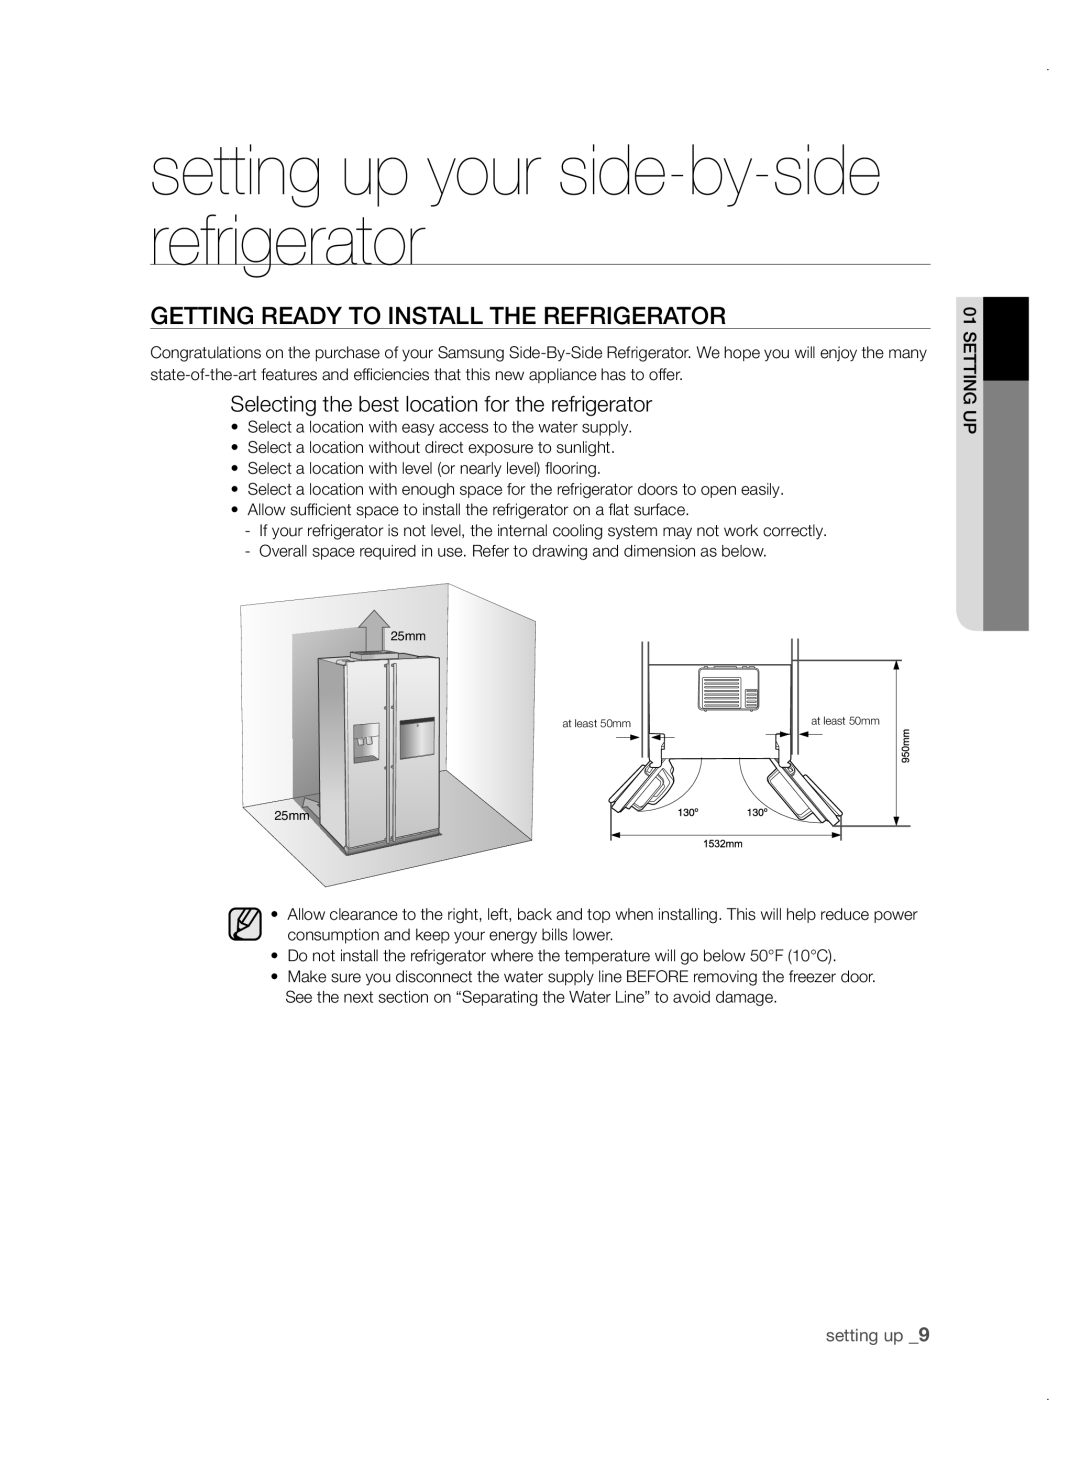 Samsung RSH1ZTPE1/XAG manual GEtting rEaDy to instaLL tHE rEfrigErator, Selecting the best location for the refrigerator 